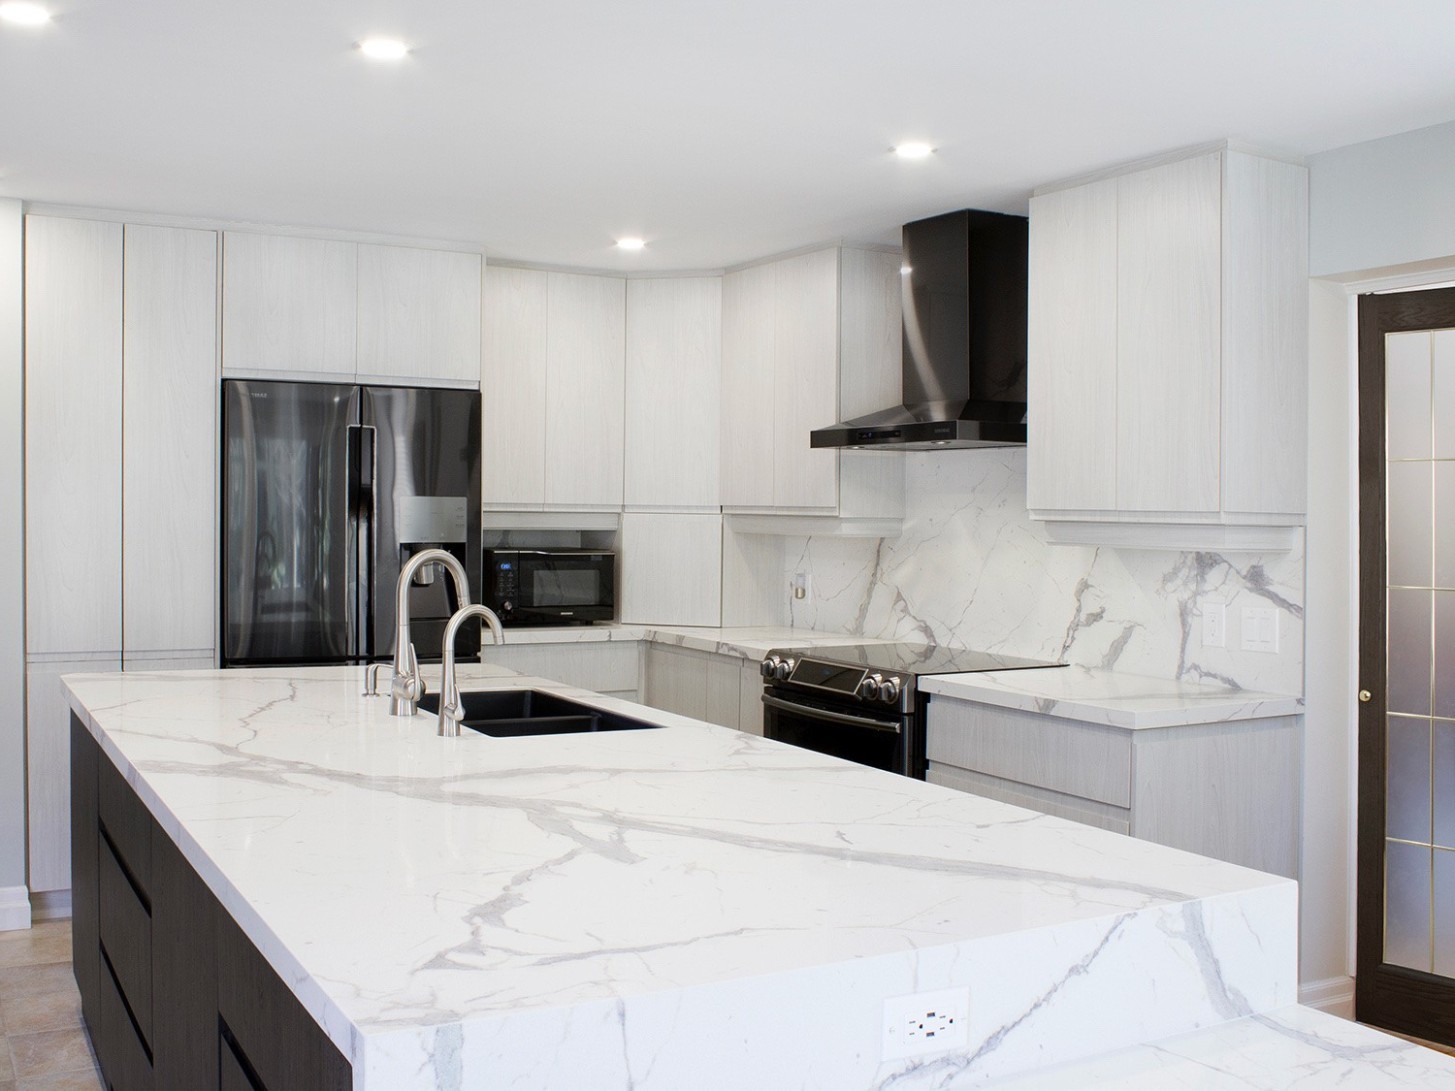 Kitchen Color Schemes for White Cabinets  Granite Transformations  - what color granite looks best with white cabinets?